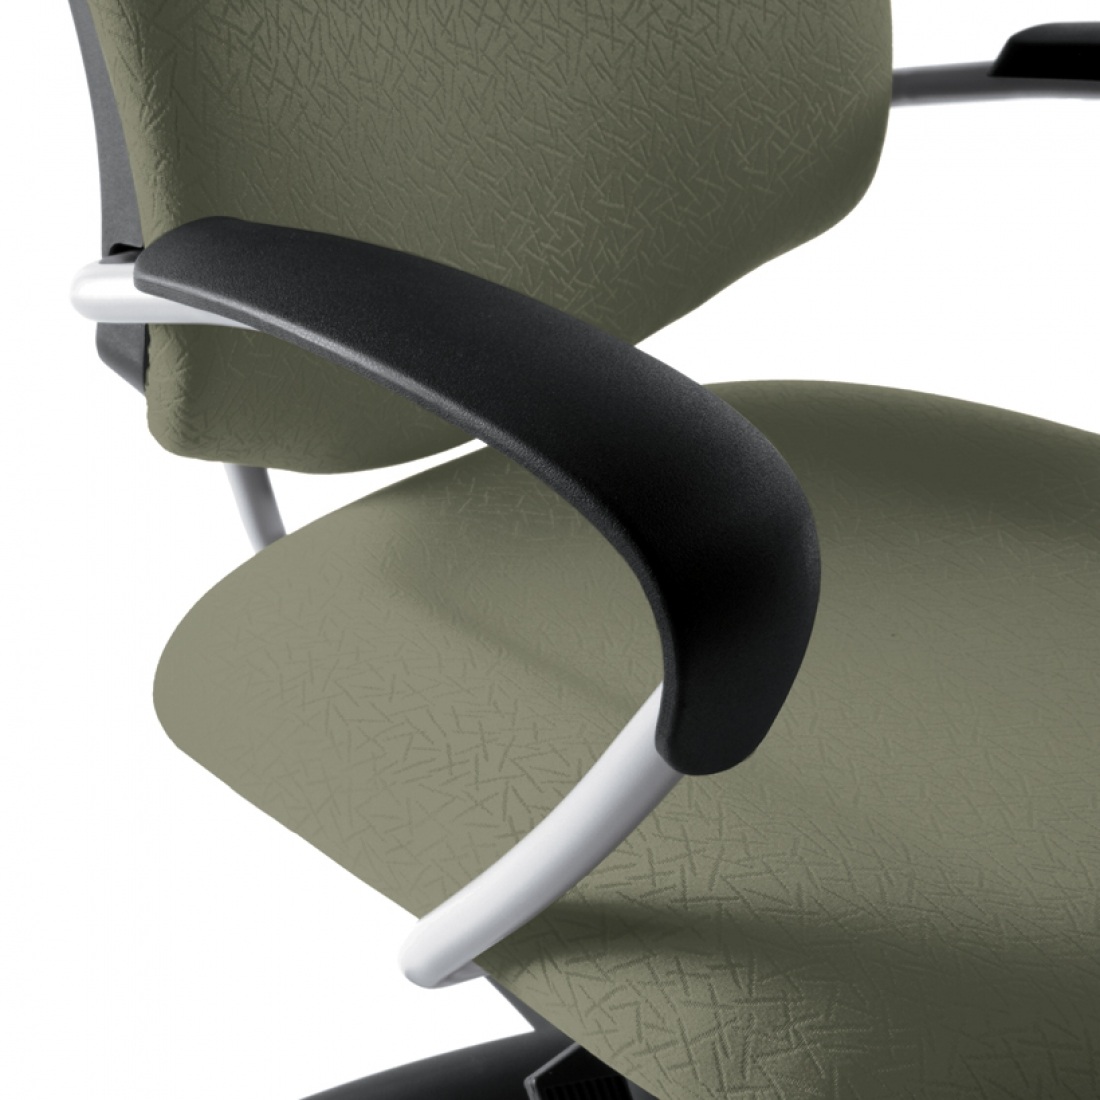 Supra Chairs Feature - Soft Durable Arms